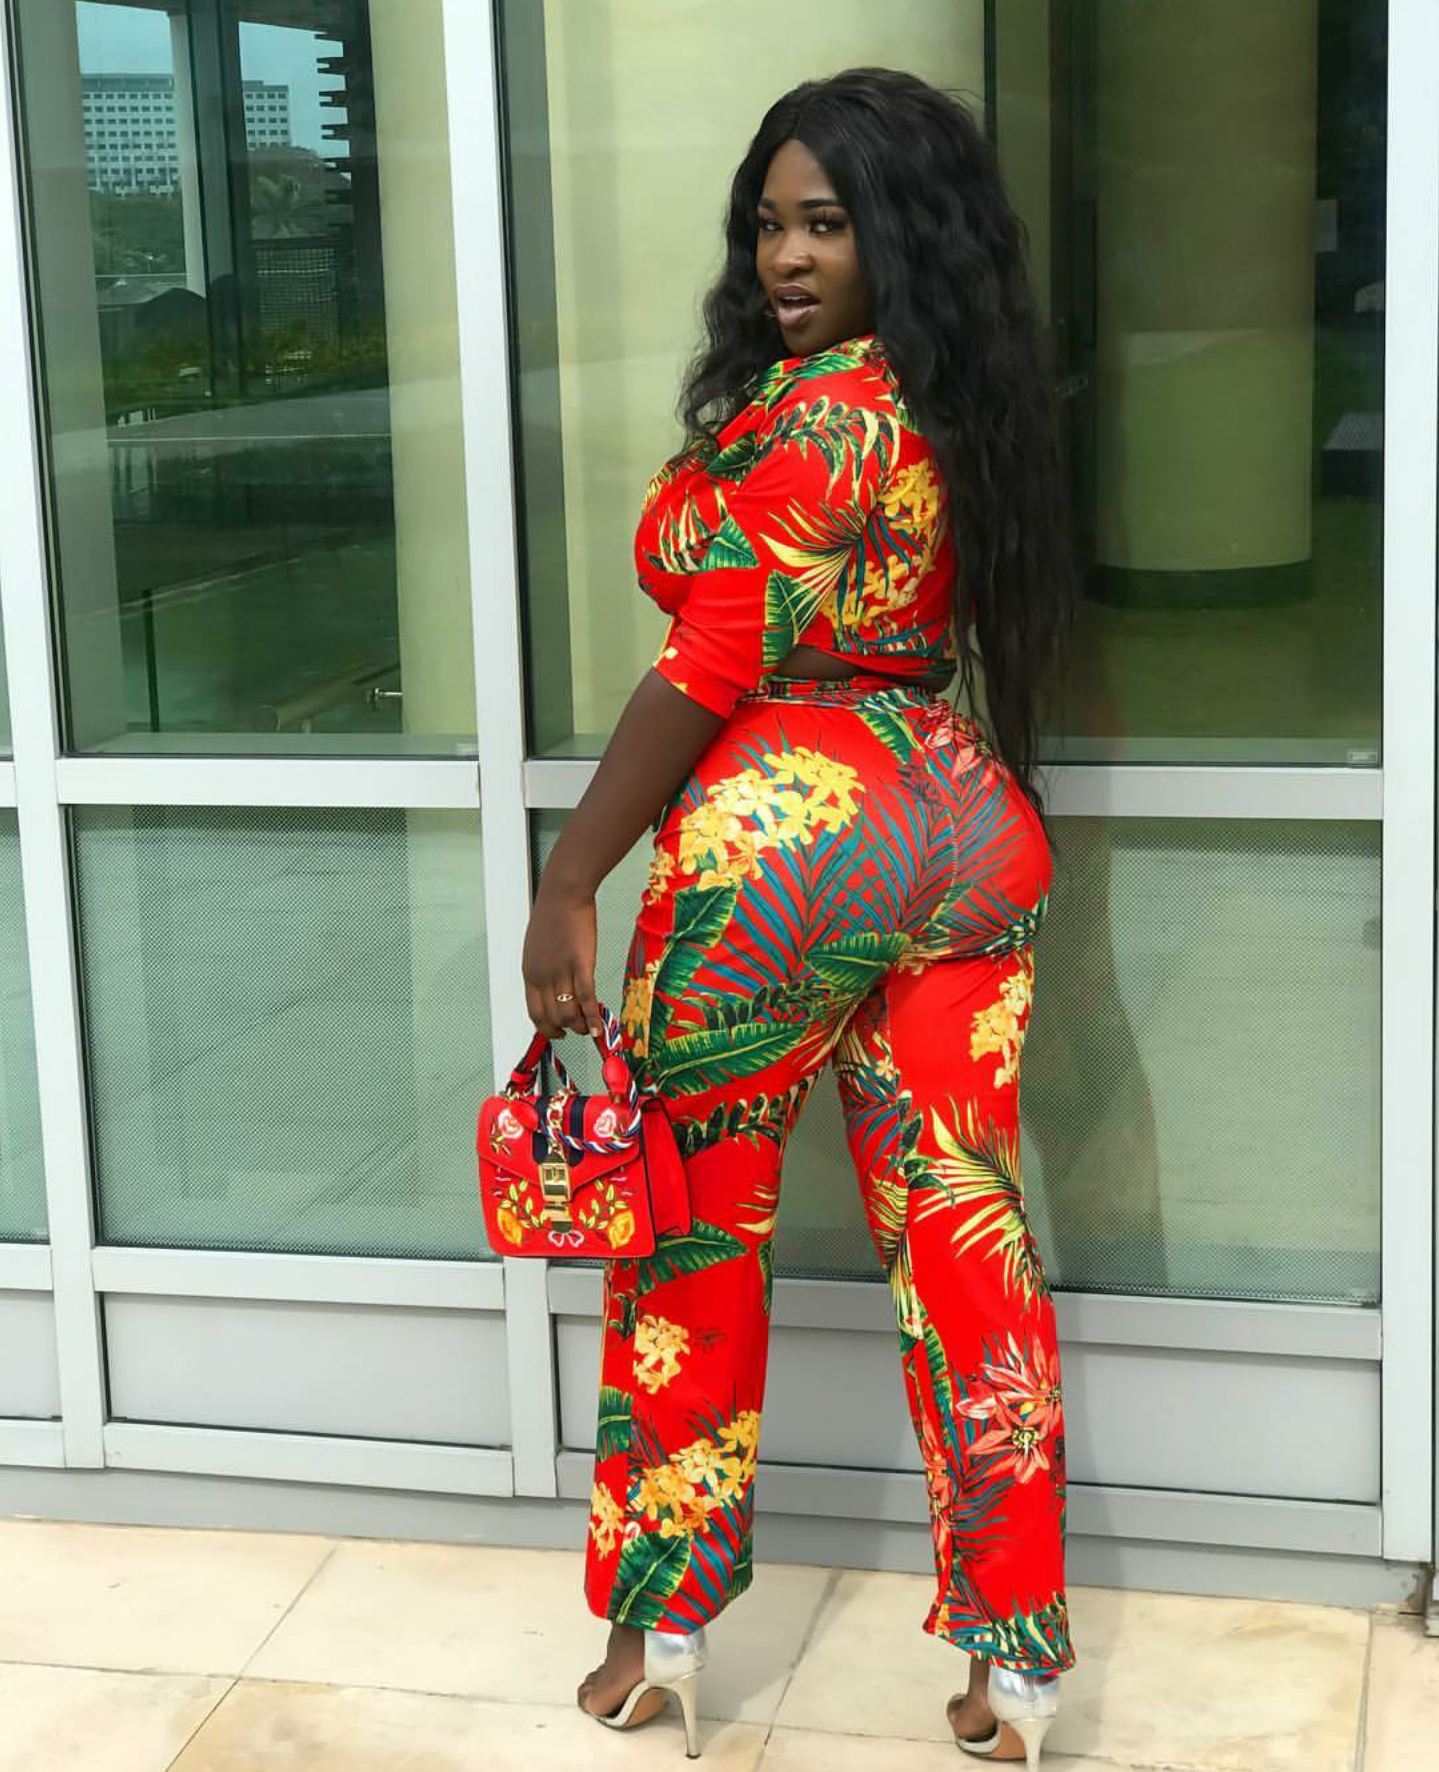 Sista Afia slaying a look and serving us curves